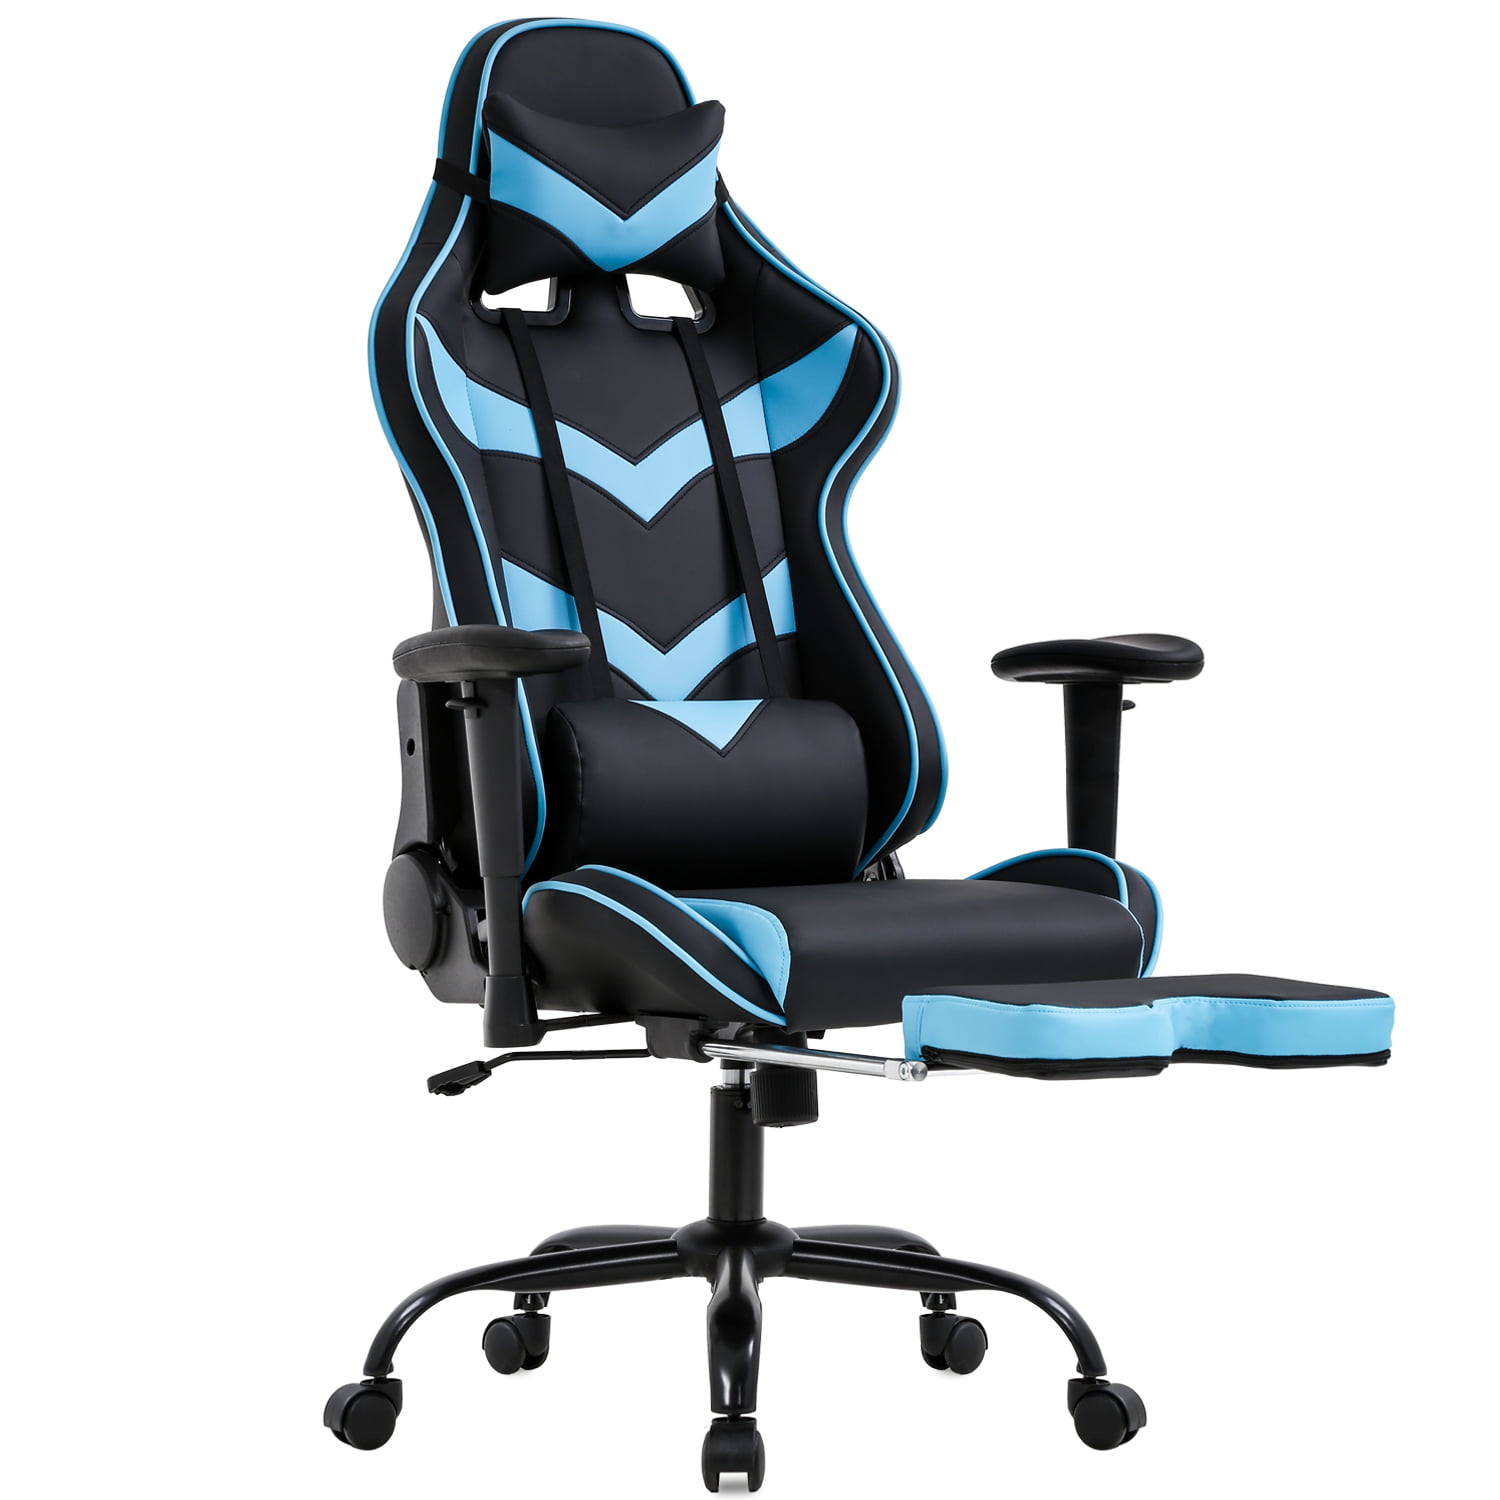 INTEY Gaming Chair Ergonomic Racing Chair Heavy Duty High Back Office PC Desk Chair with Adjustable Armrest Rot 